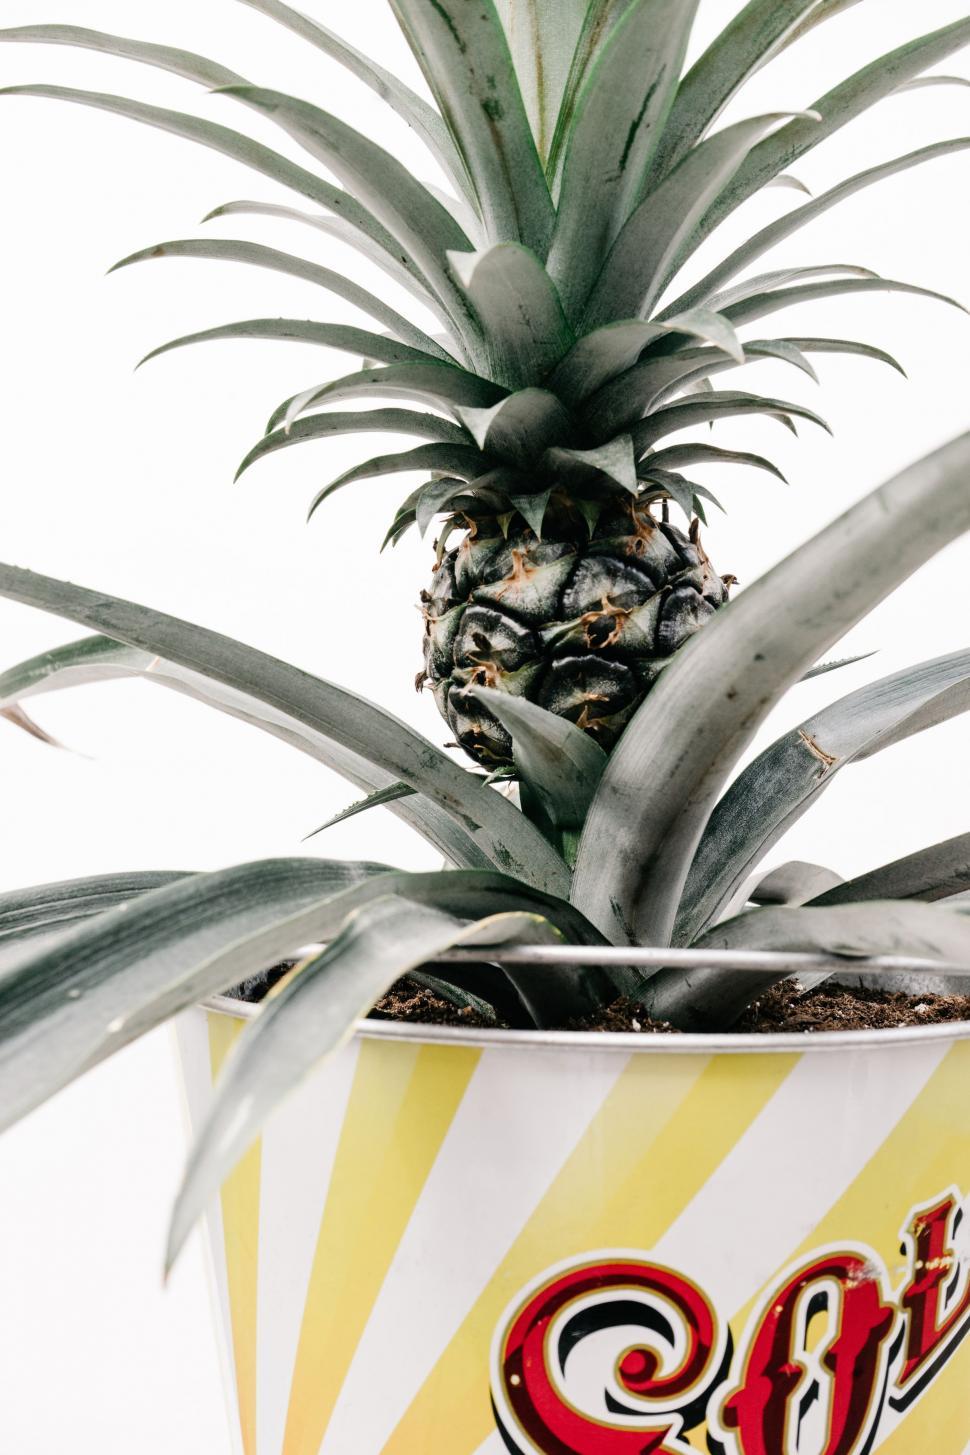 Free Image of Pineapple in Pot  